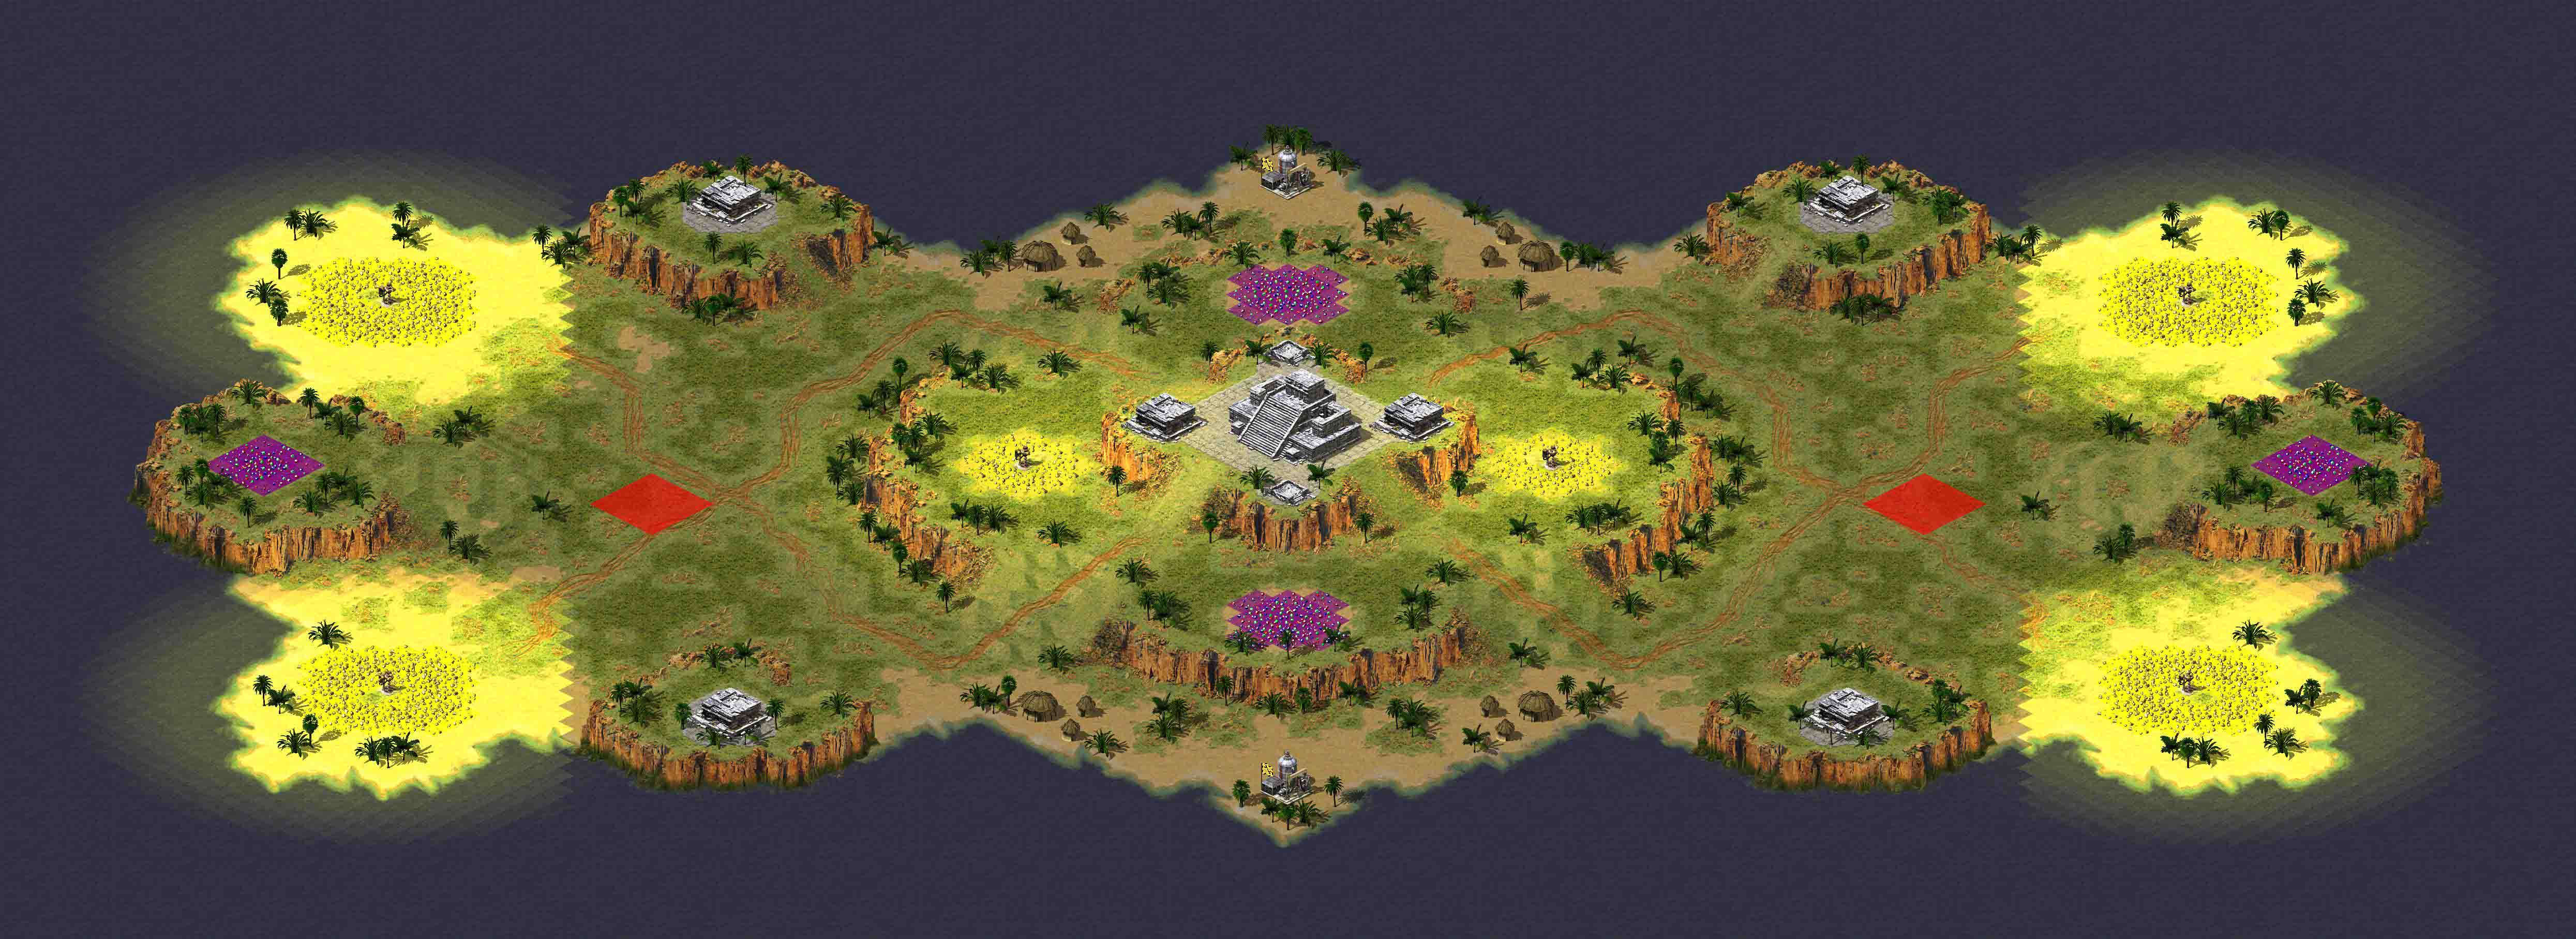 Official Tournament Map A - Command & Conquer Wiki - covering Tiberium, Red  Alert and Generals universes